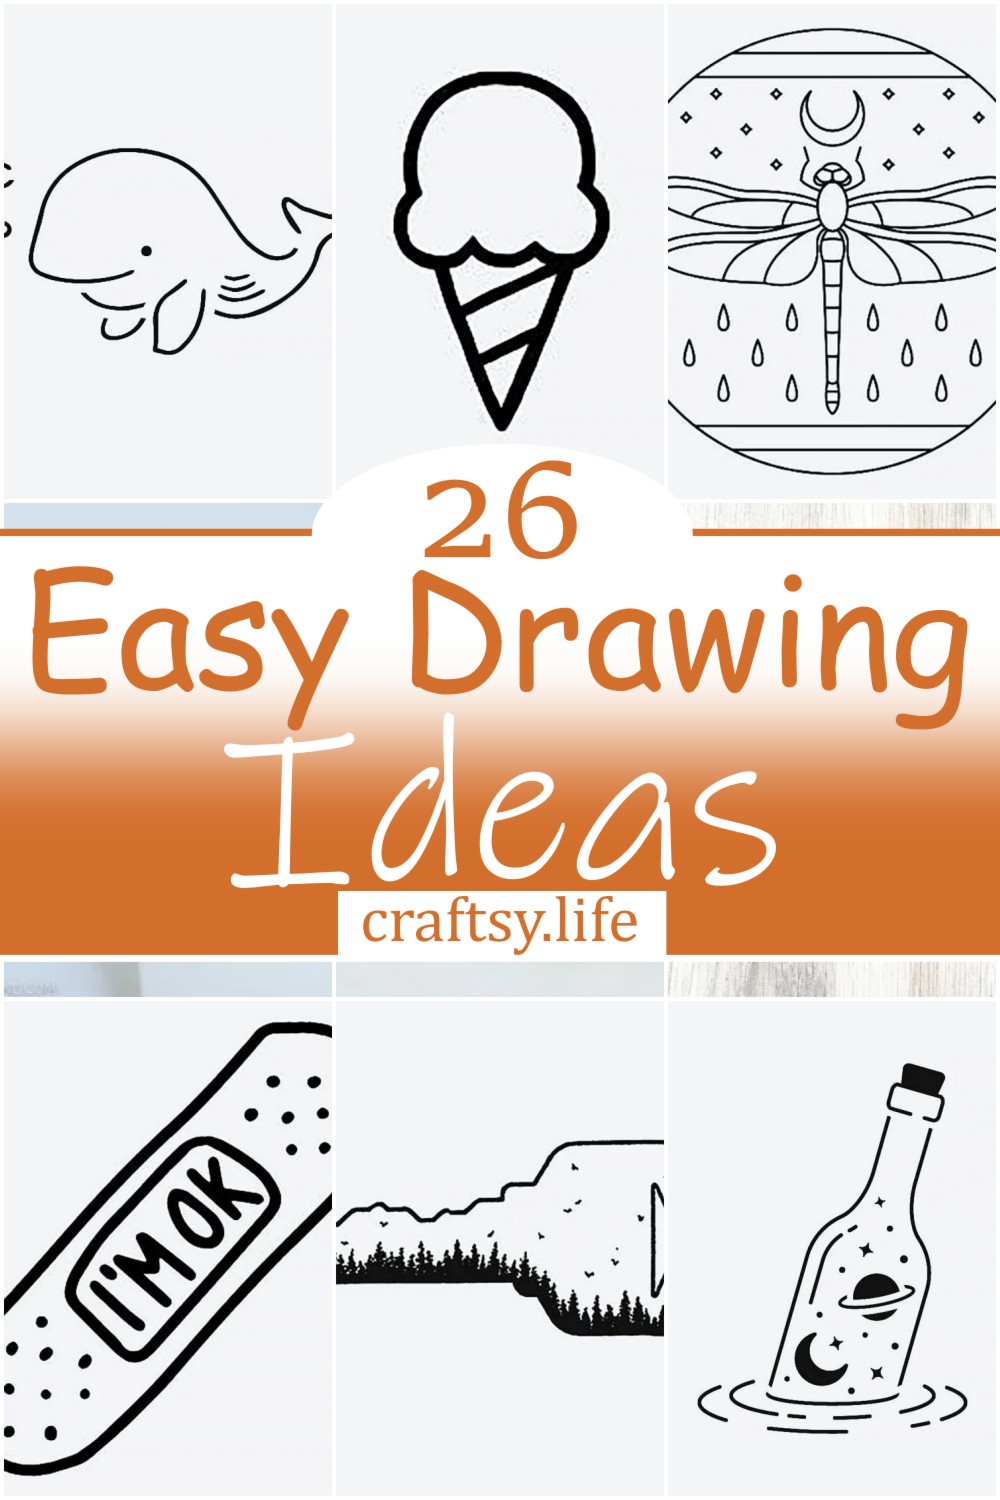 26 Easy Drawing Ideas